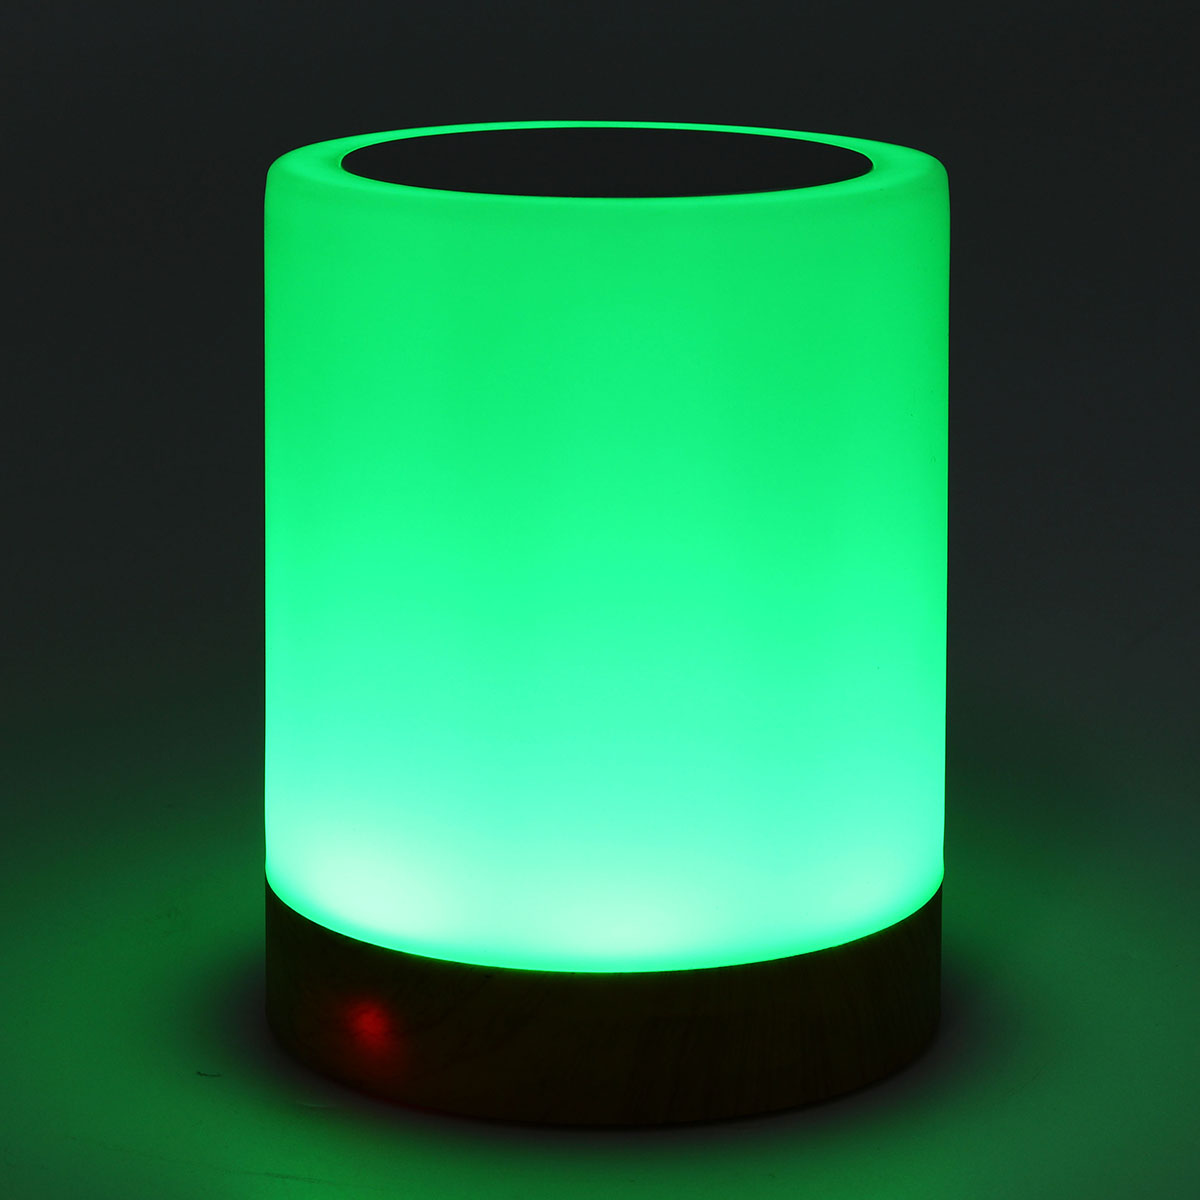 Dimmable-Touch-LED-Night-Light-USB-Charging-Colorful-Bedroom-Table-Lamp-Decor-Children-Gift-1689743-9